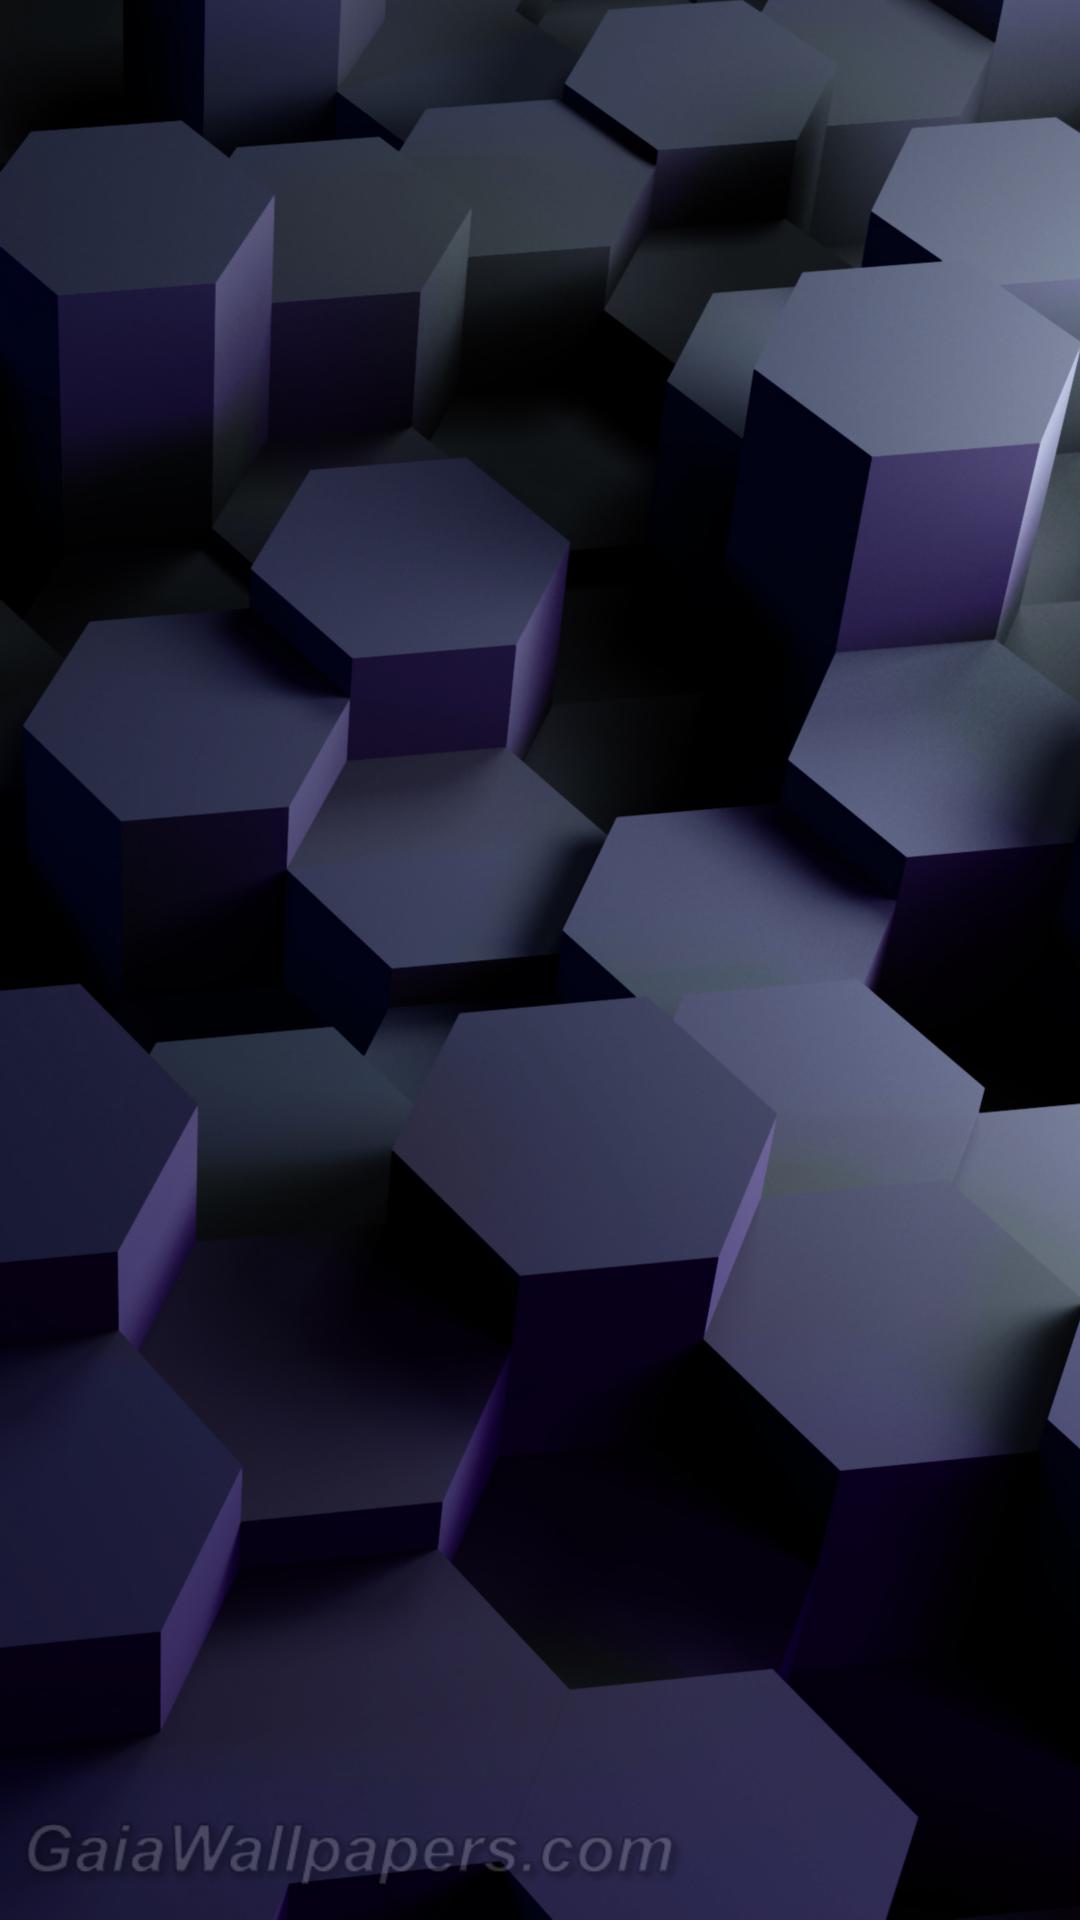 Columns of hexagons between the shadow and the light - Free desktop wallpapers